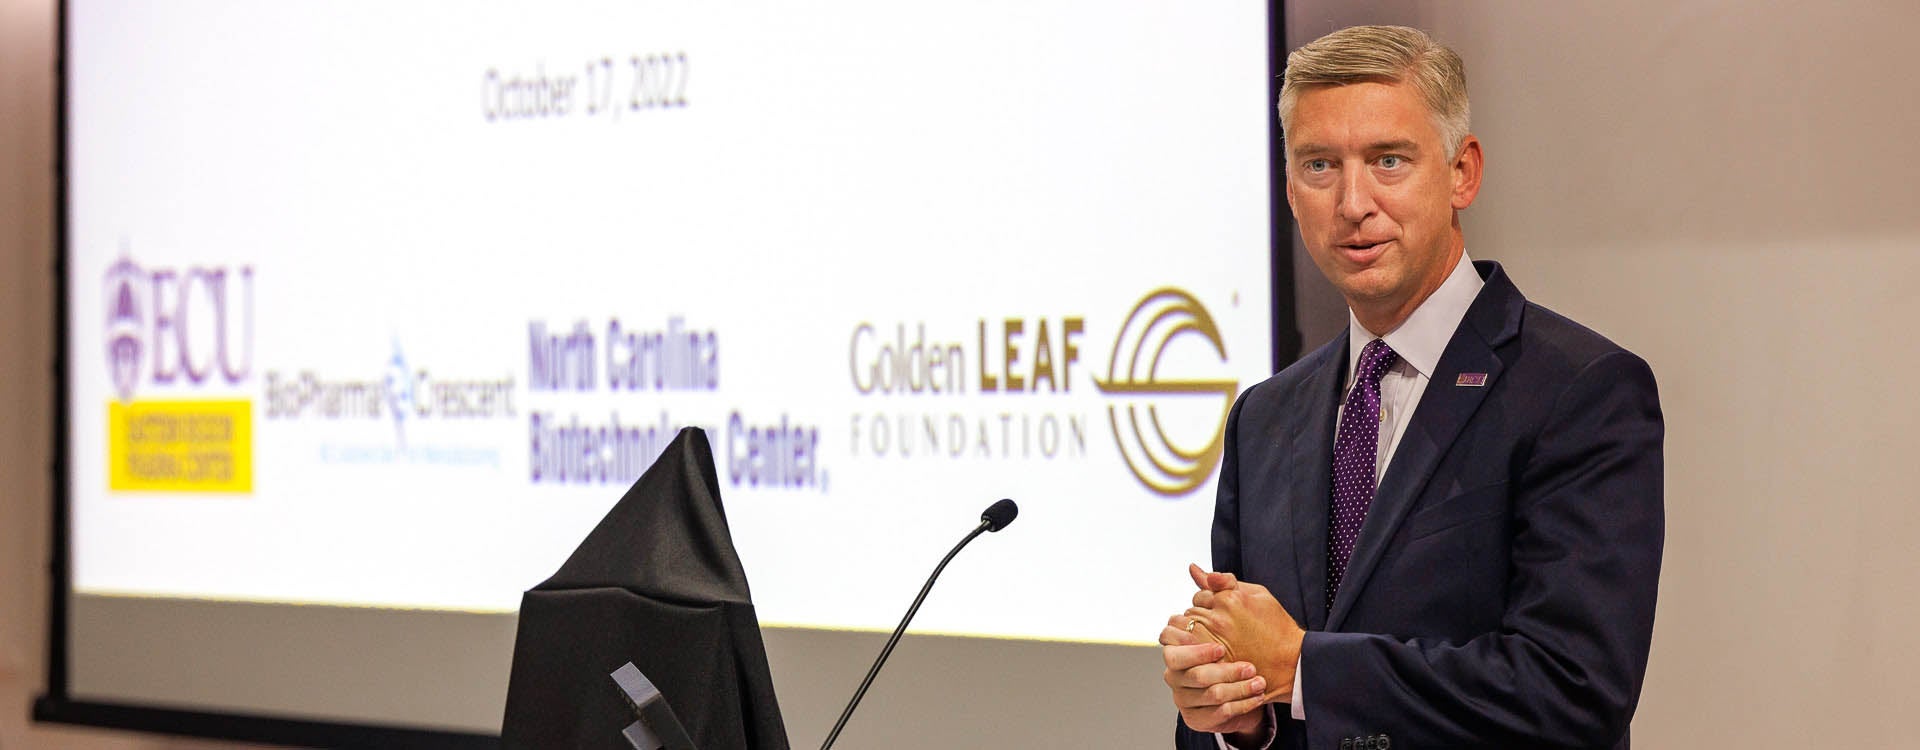 Chancellor Philip Rogers speaks during a ceremony honoring the Golden LEAF Foundation's support of ECU on Monday in the Life Sciences and Biotechnology Building. (Photos by Cliff Hollis)